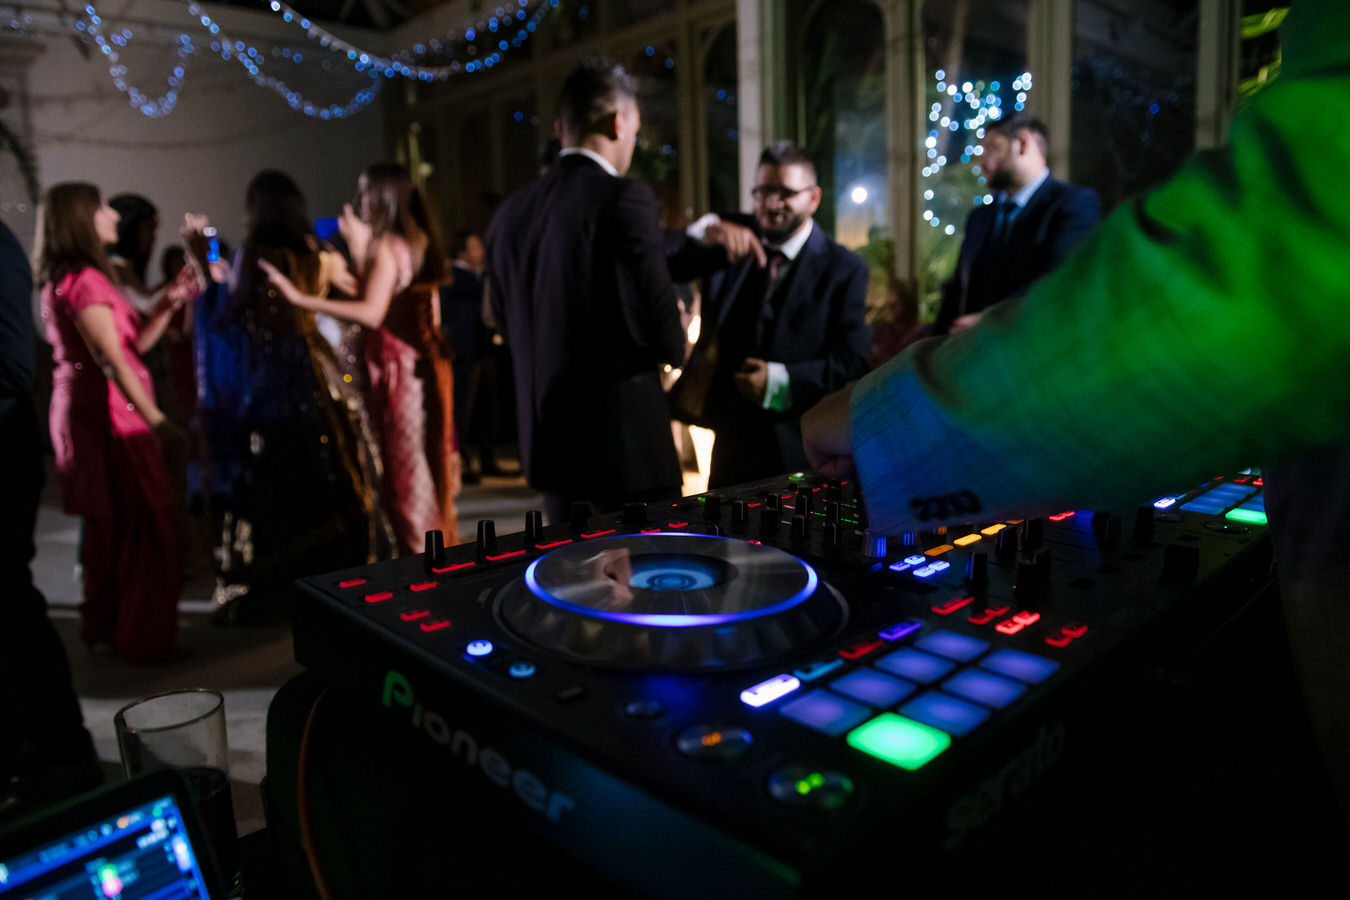 Sikh Asian wedding Dj mixes the music for the party so everyone enjoys himself